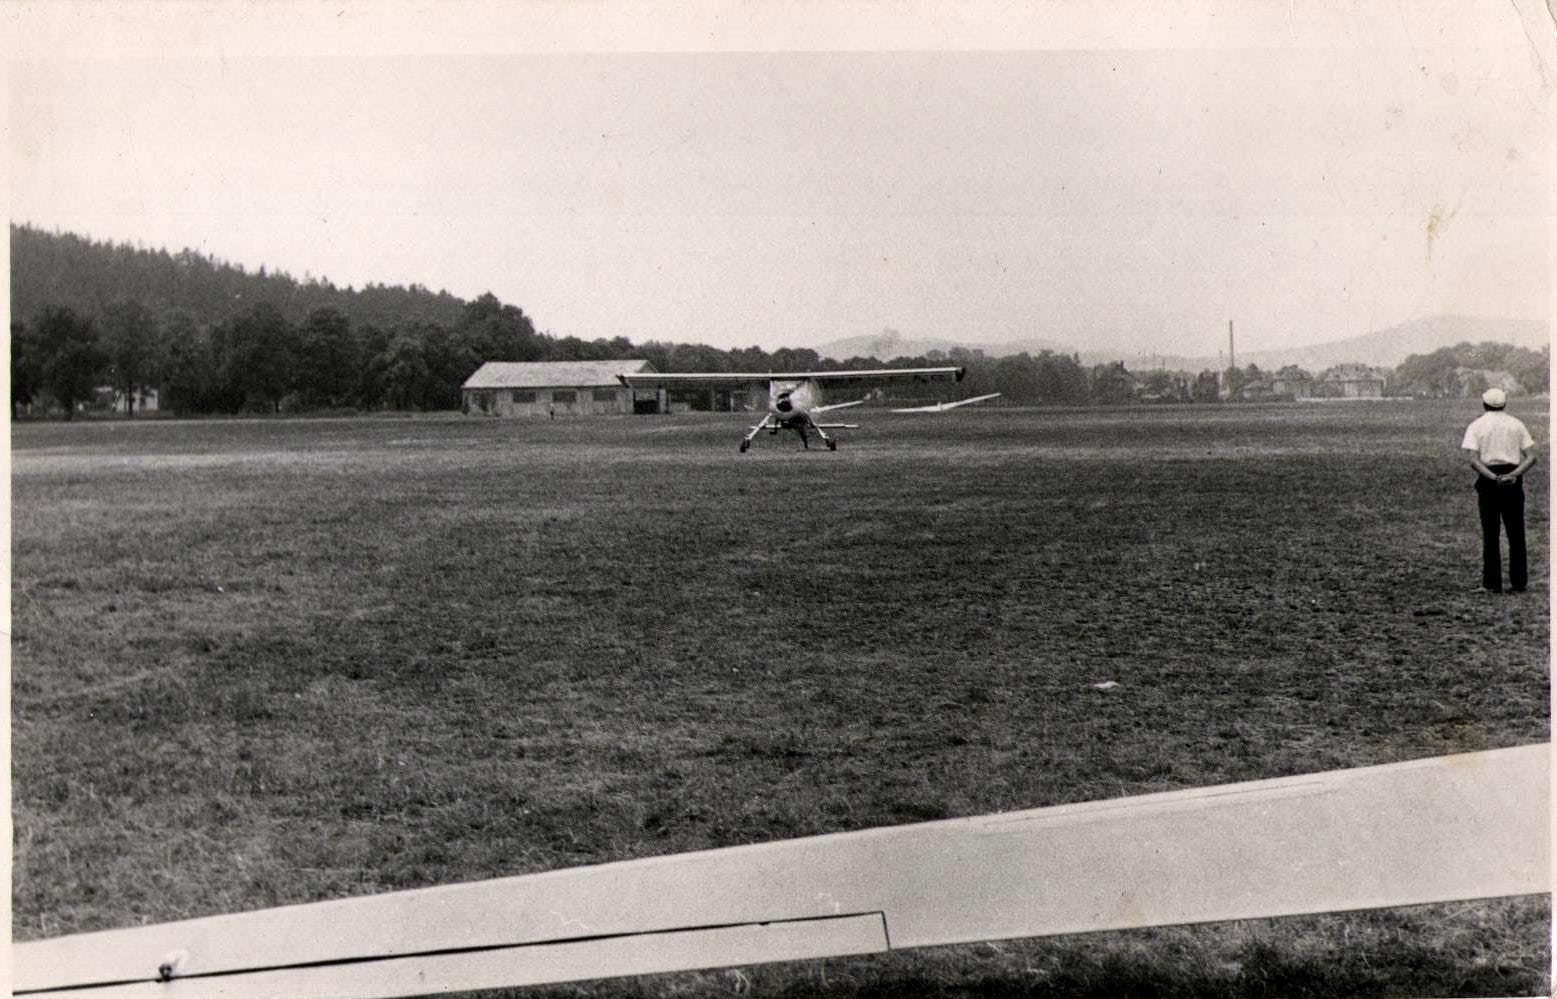 Airport in Lower Silesia for agro-aviation treatments - 1970s.